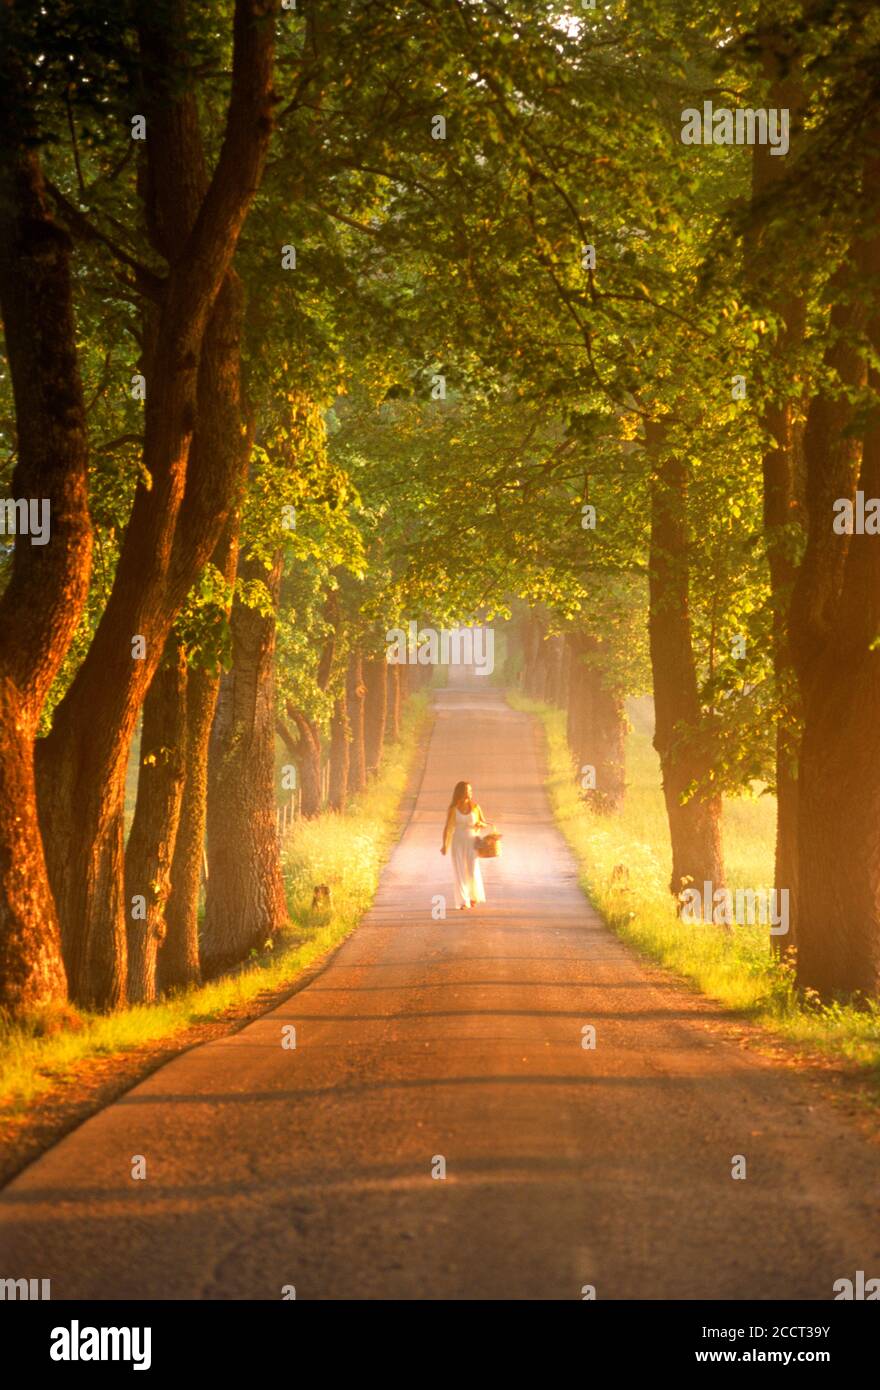 Woman with basket on tree lined country road in Sweden at sunrise Stock Photo